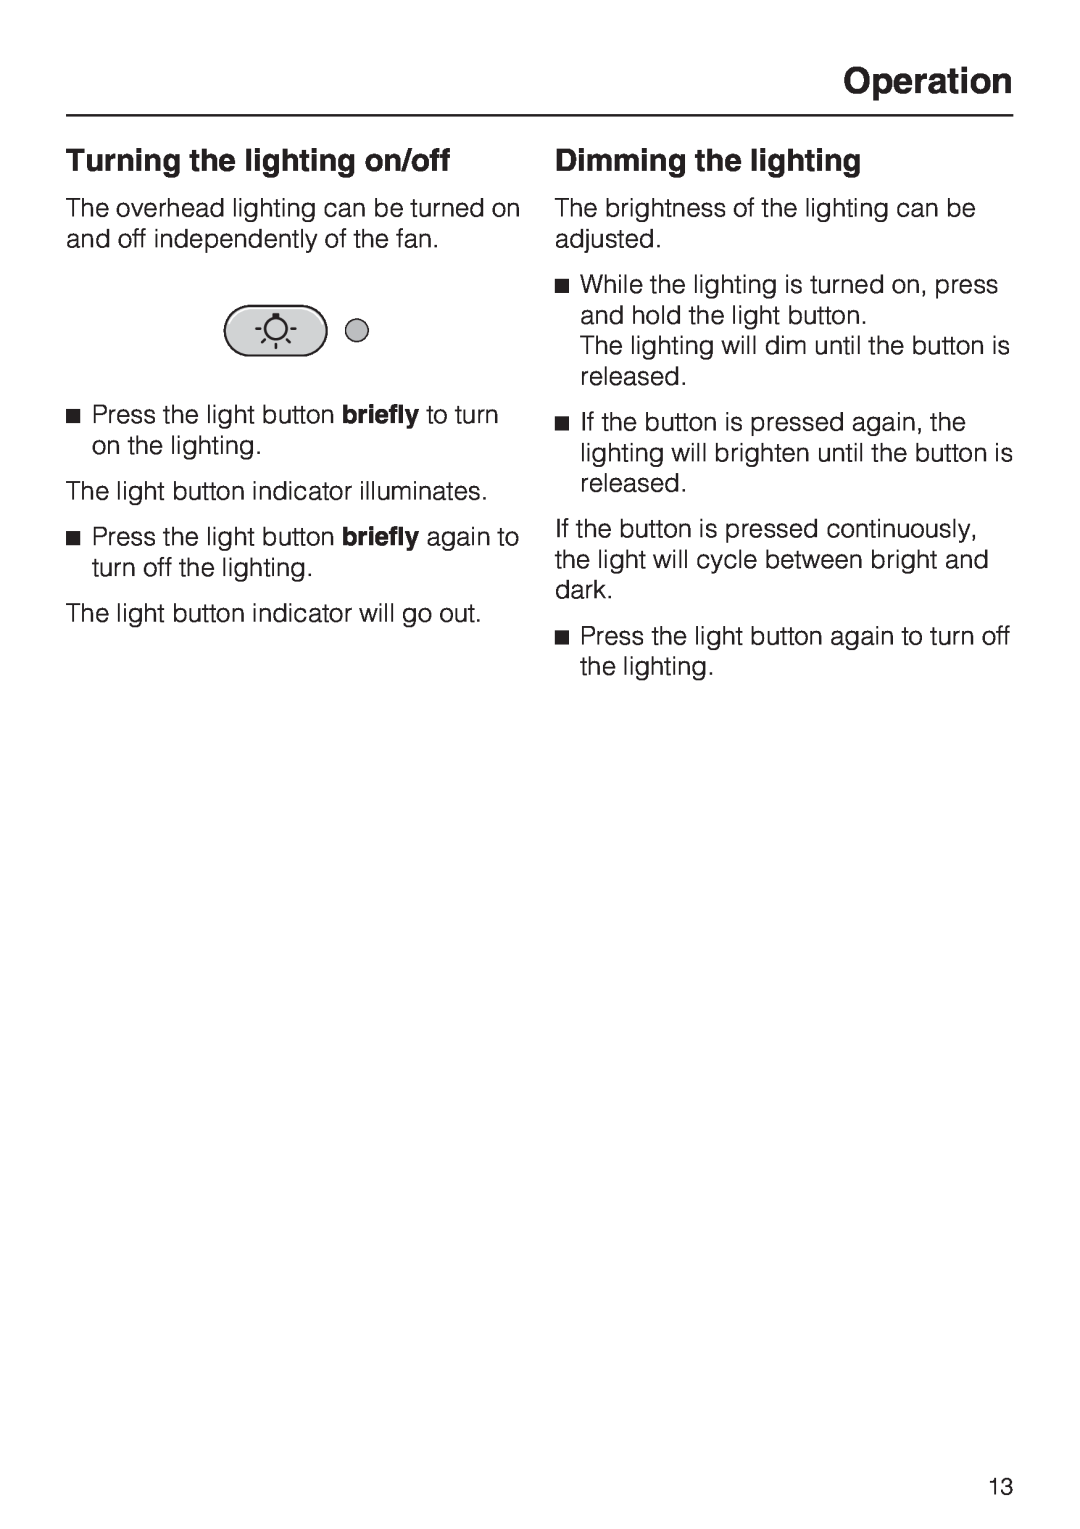 Miele DA5190W installation instructions Turning the lighting on/off, Dimming the lighting, Operation 